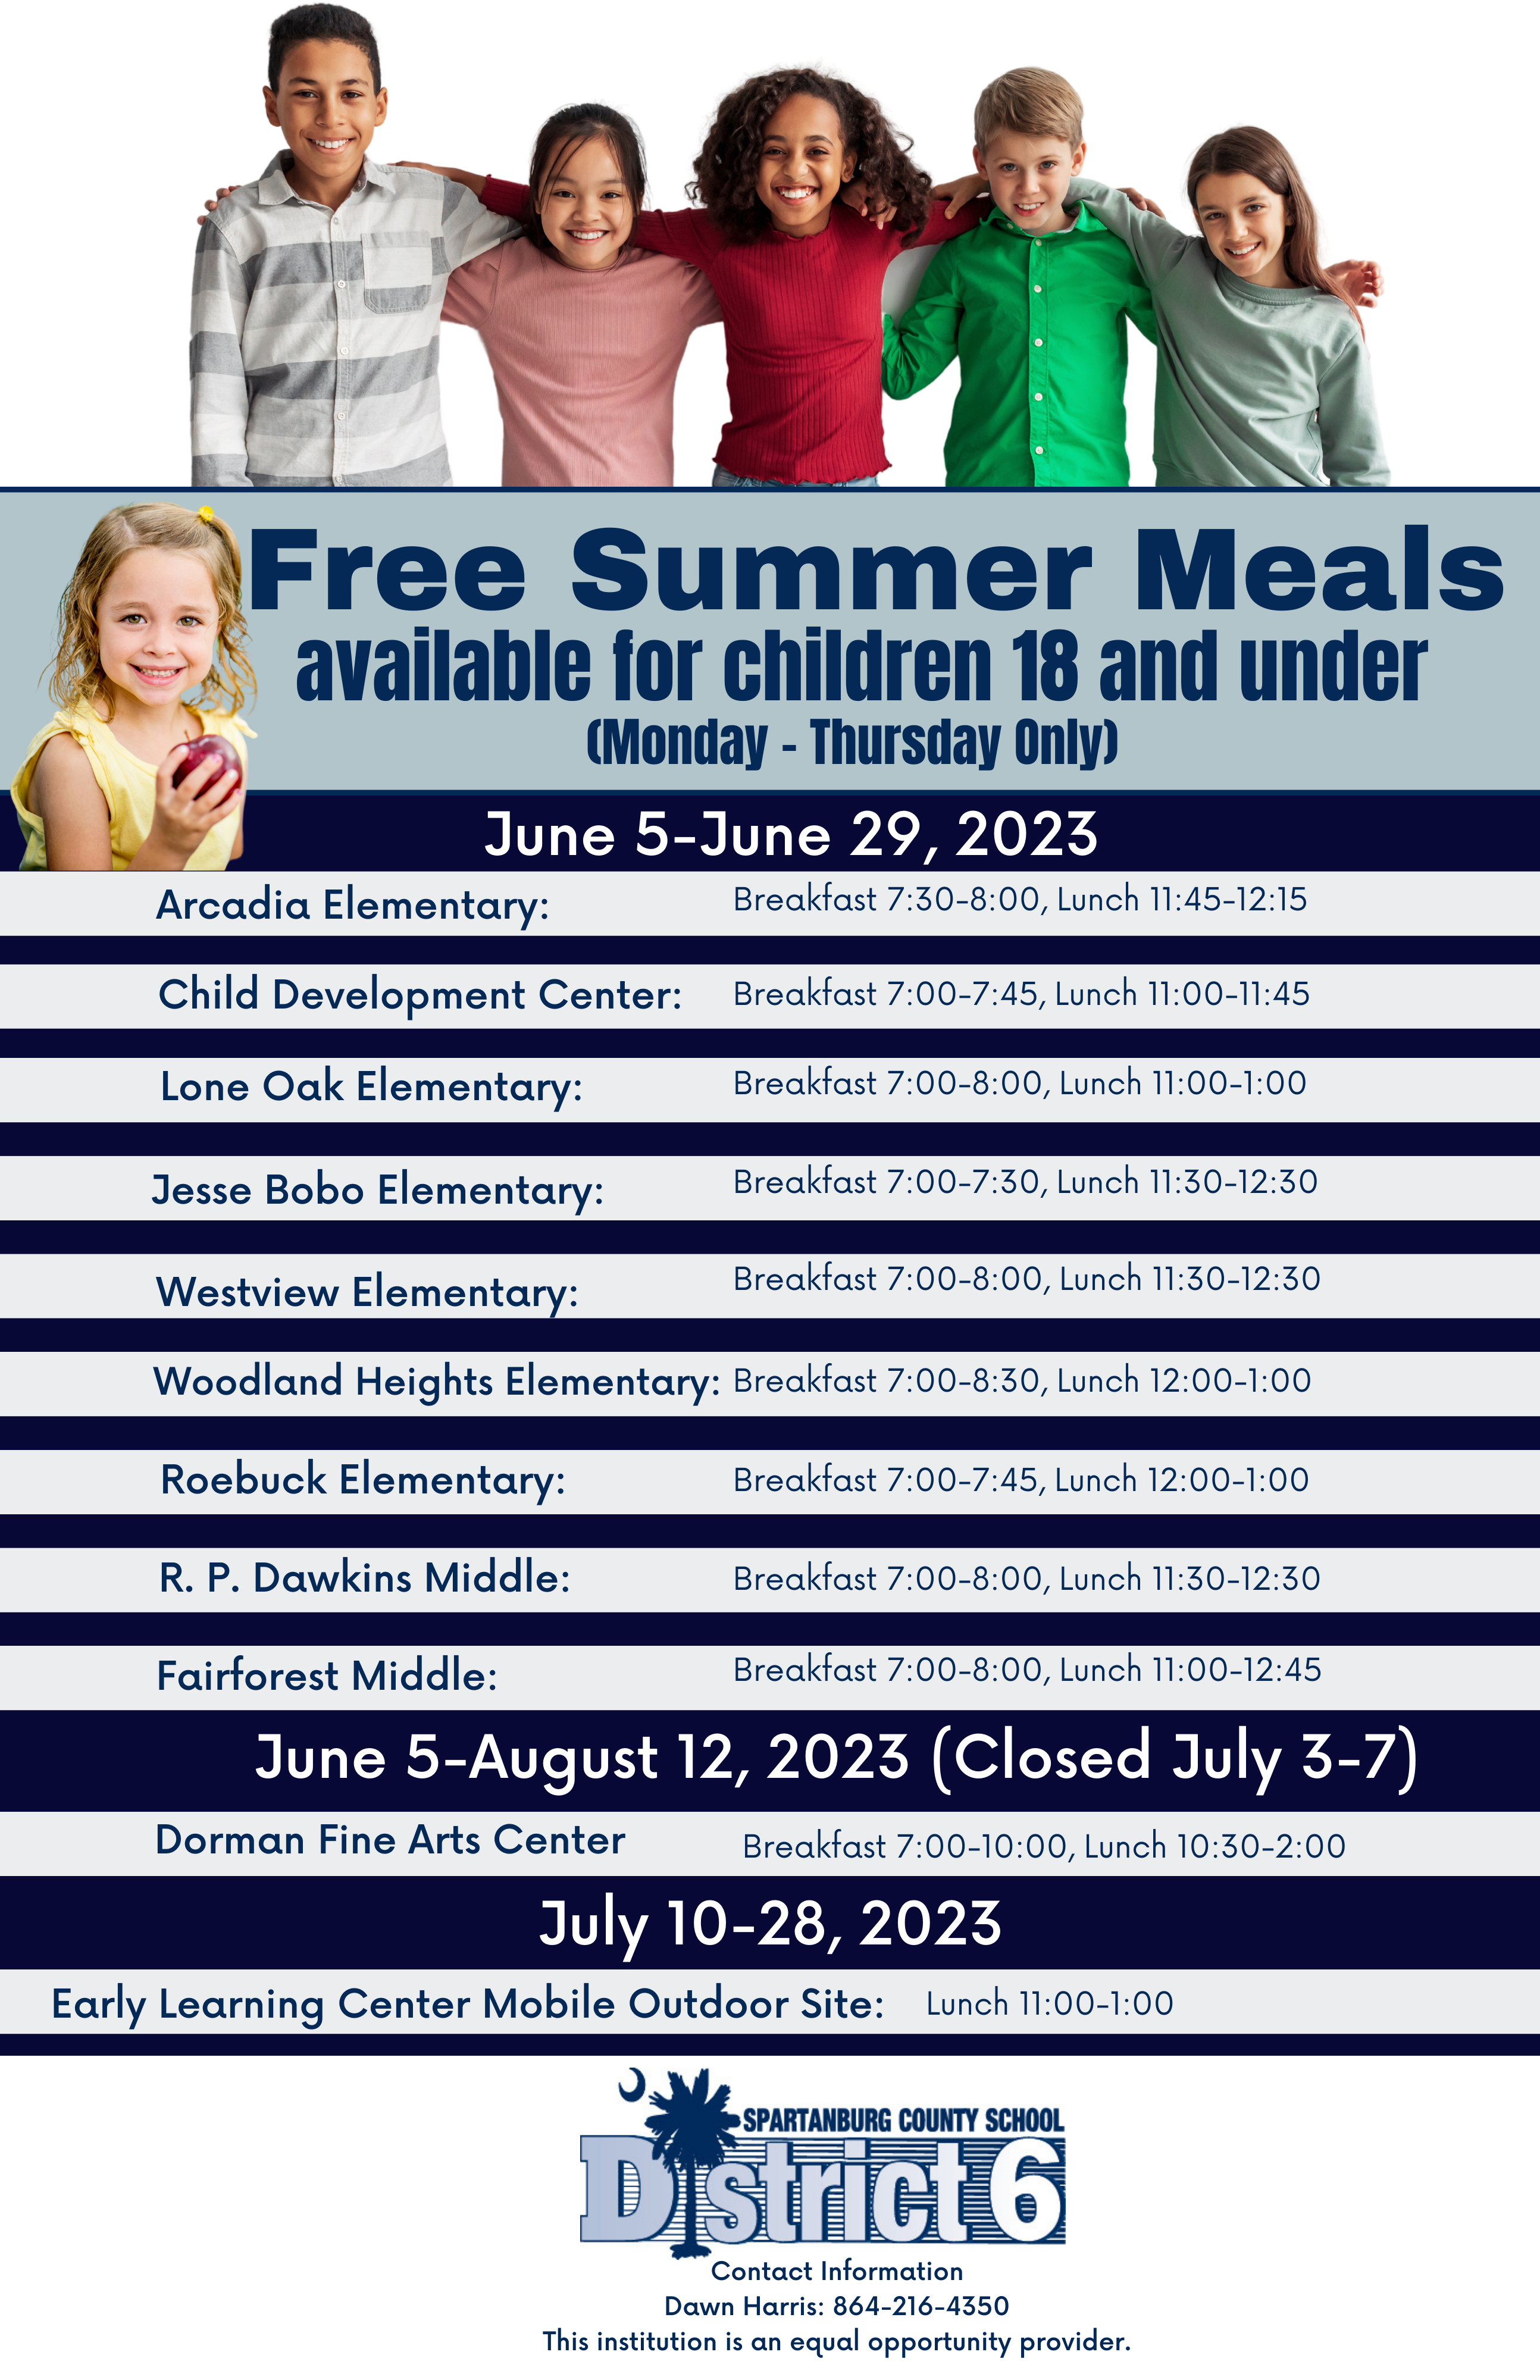 Flyer with info about free Summer Meals